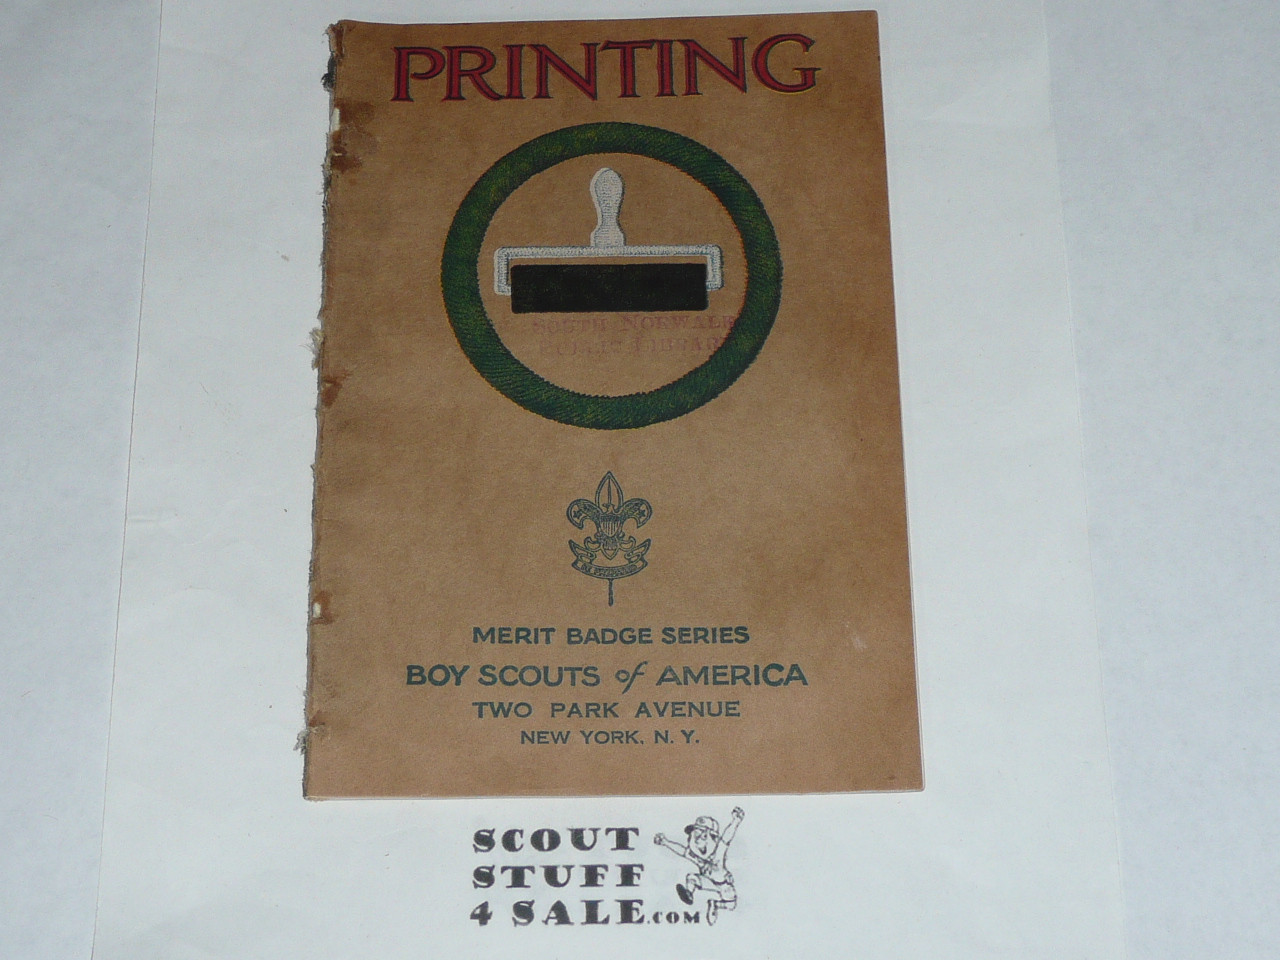 Printing Merit Badge Pamphlet, Type 3, Tan Cover, 11-40 Printing, some spine wear from library binding but book is solid